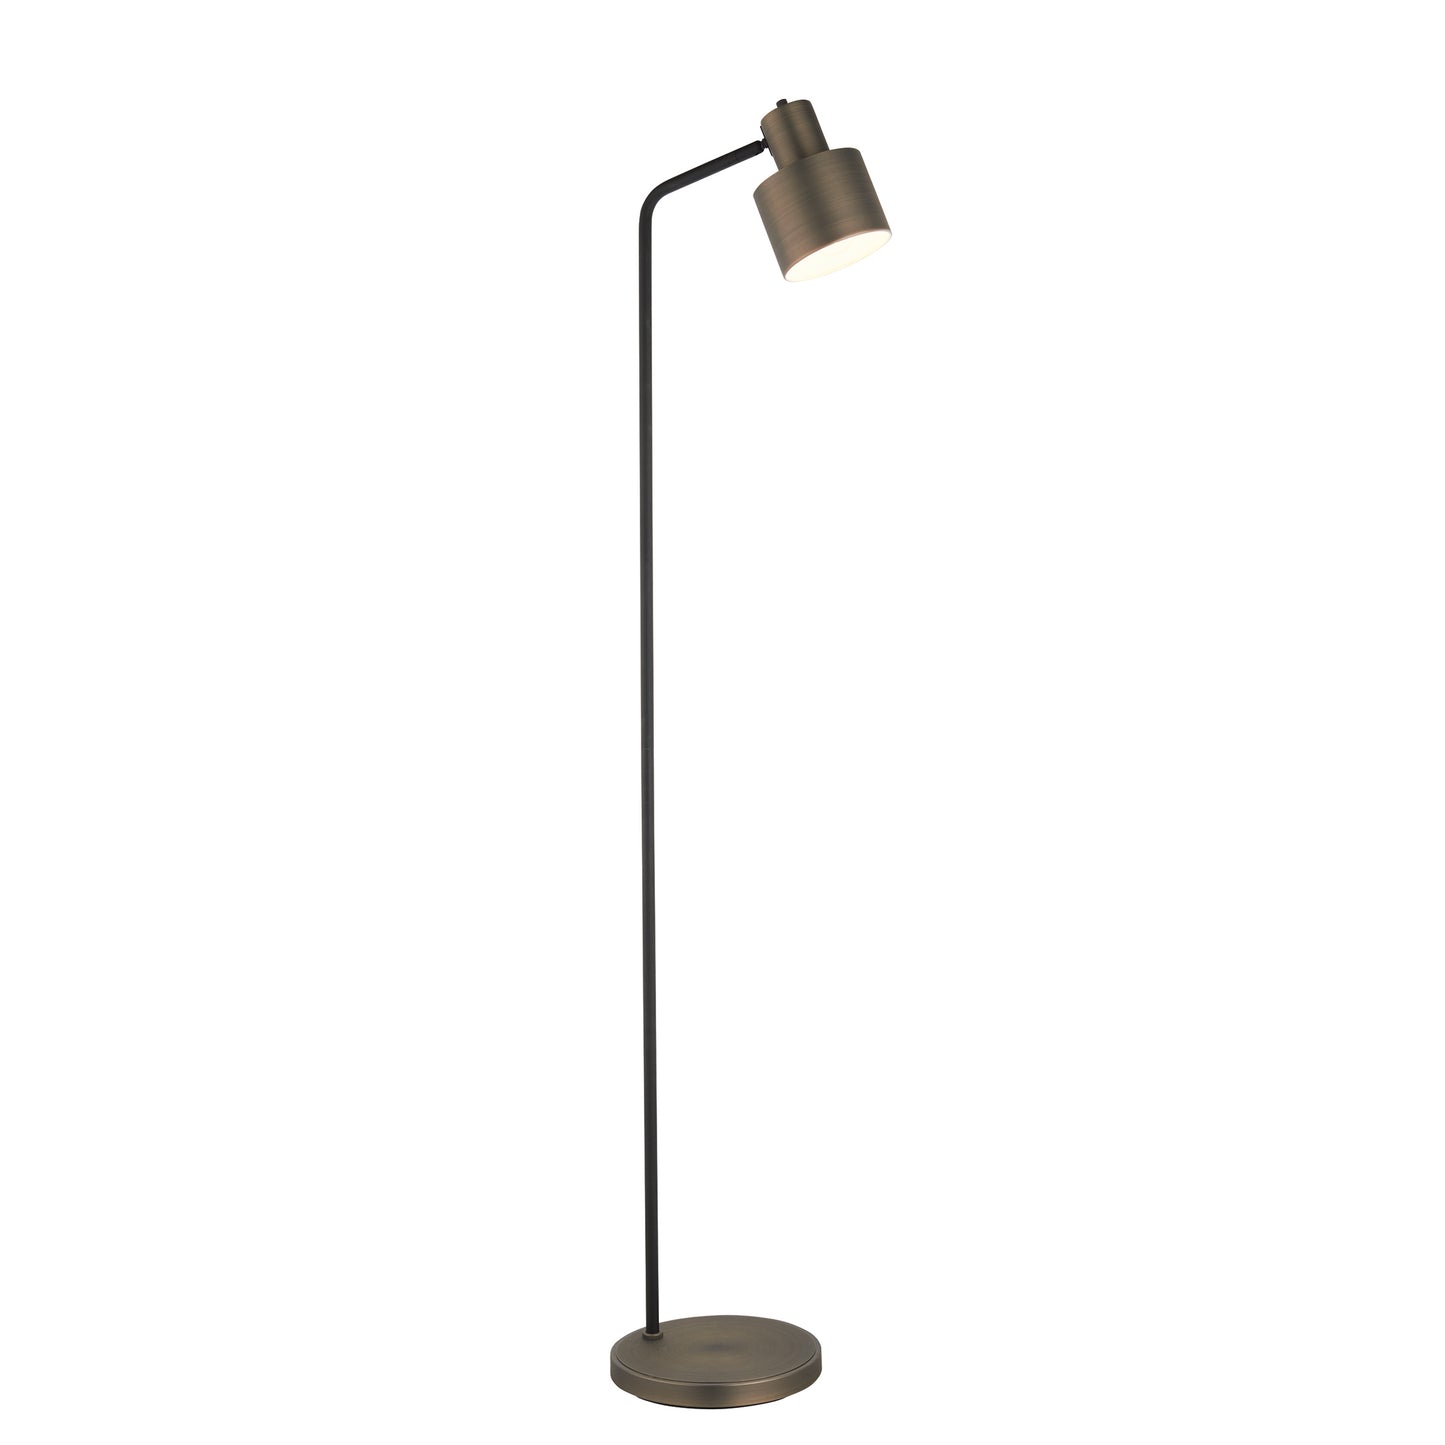 A Mayfield Floor Lamp by Kikiathome.co.uk, perfect for interior decor with its metal base and black shade.